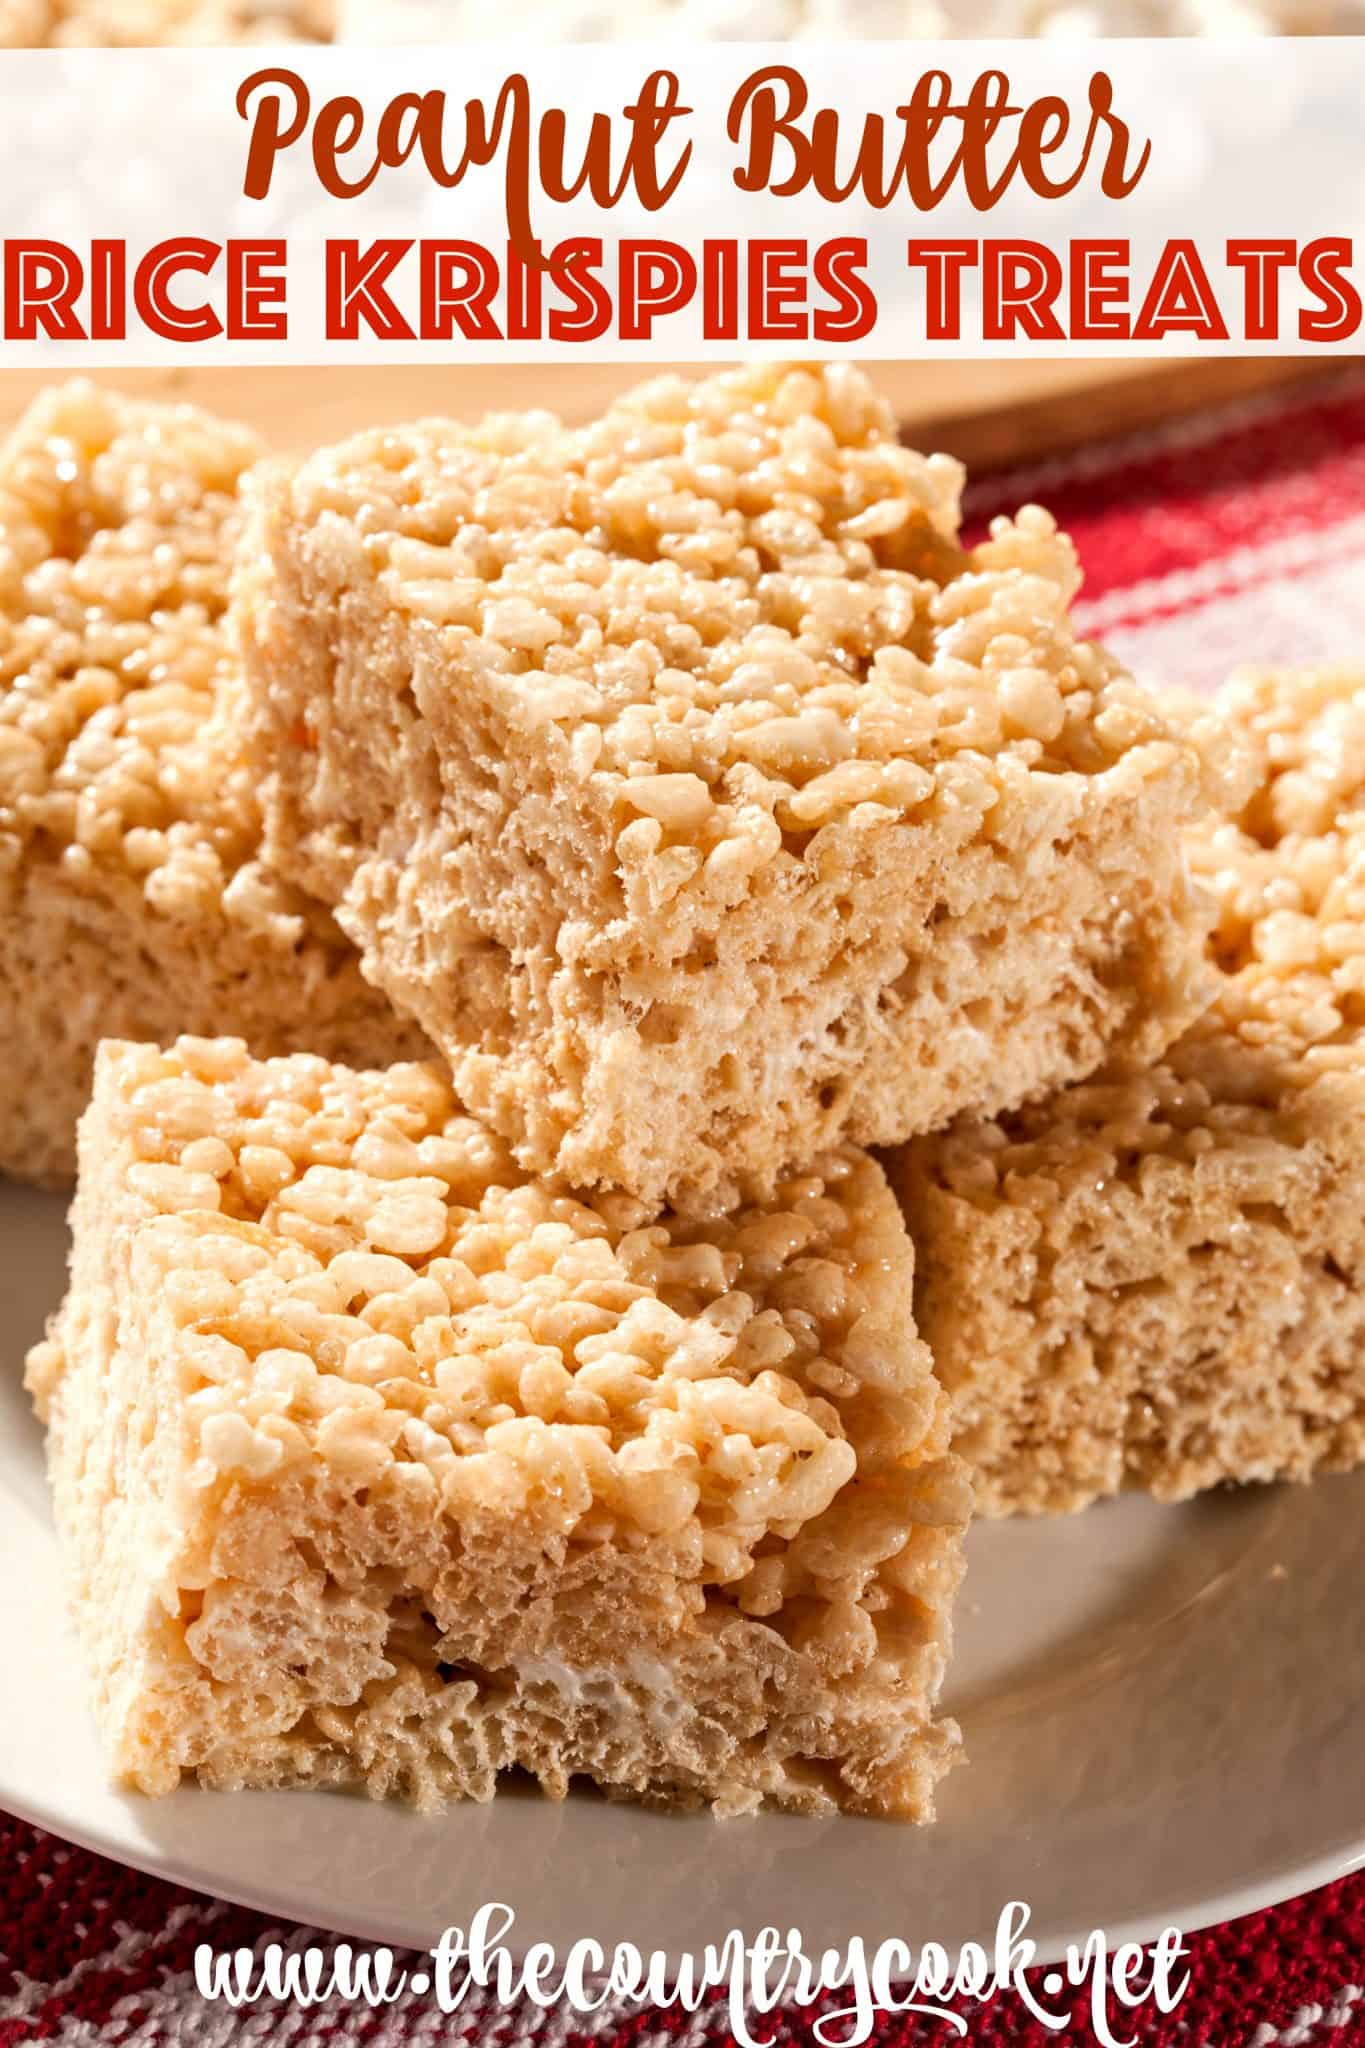 37 HQ Images Can Cats Eat Rice Krispies / Peanut Butter Rice Krispies